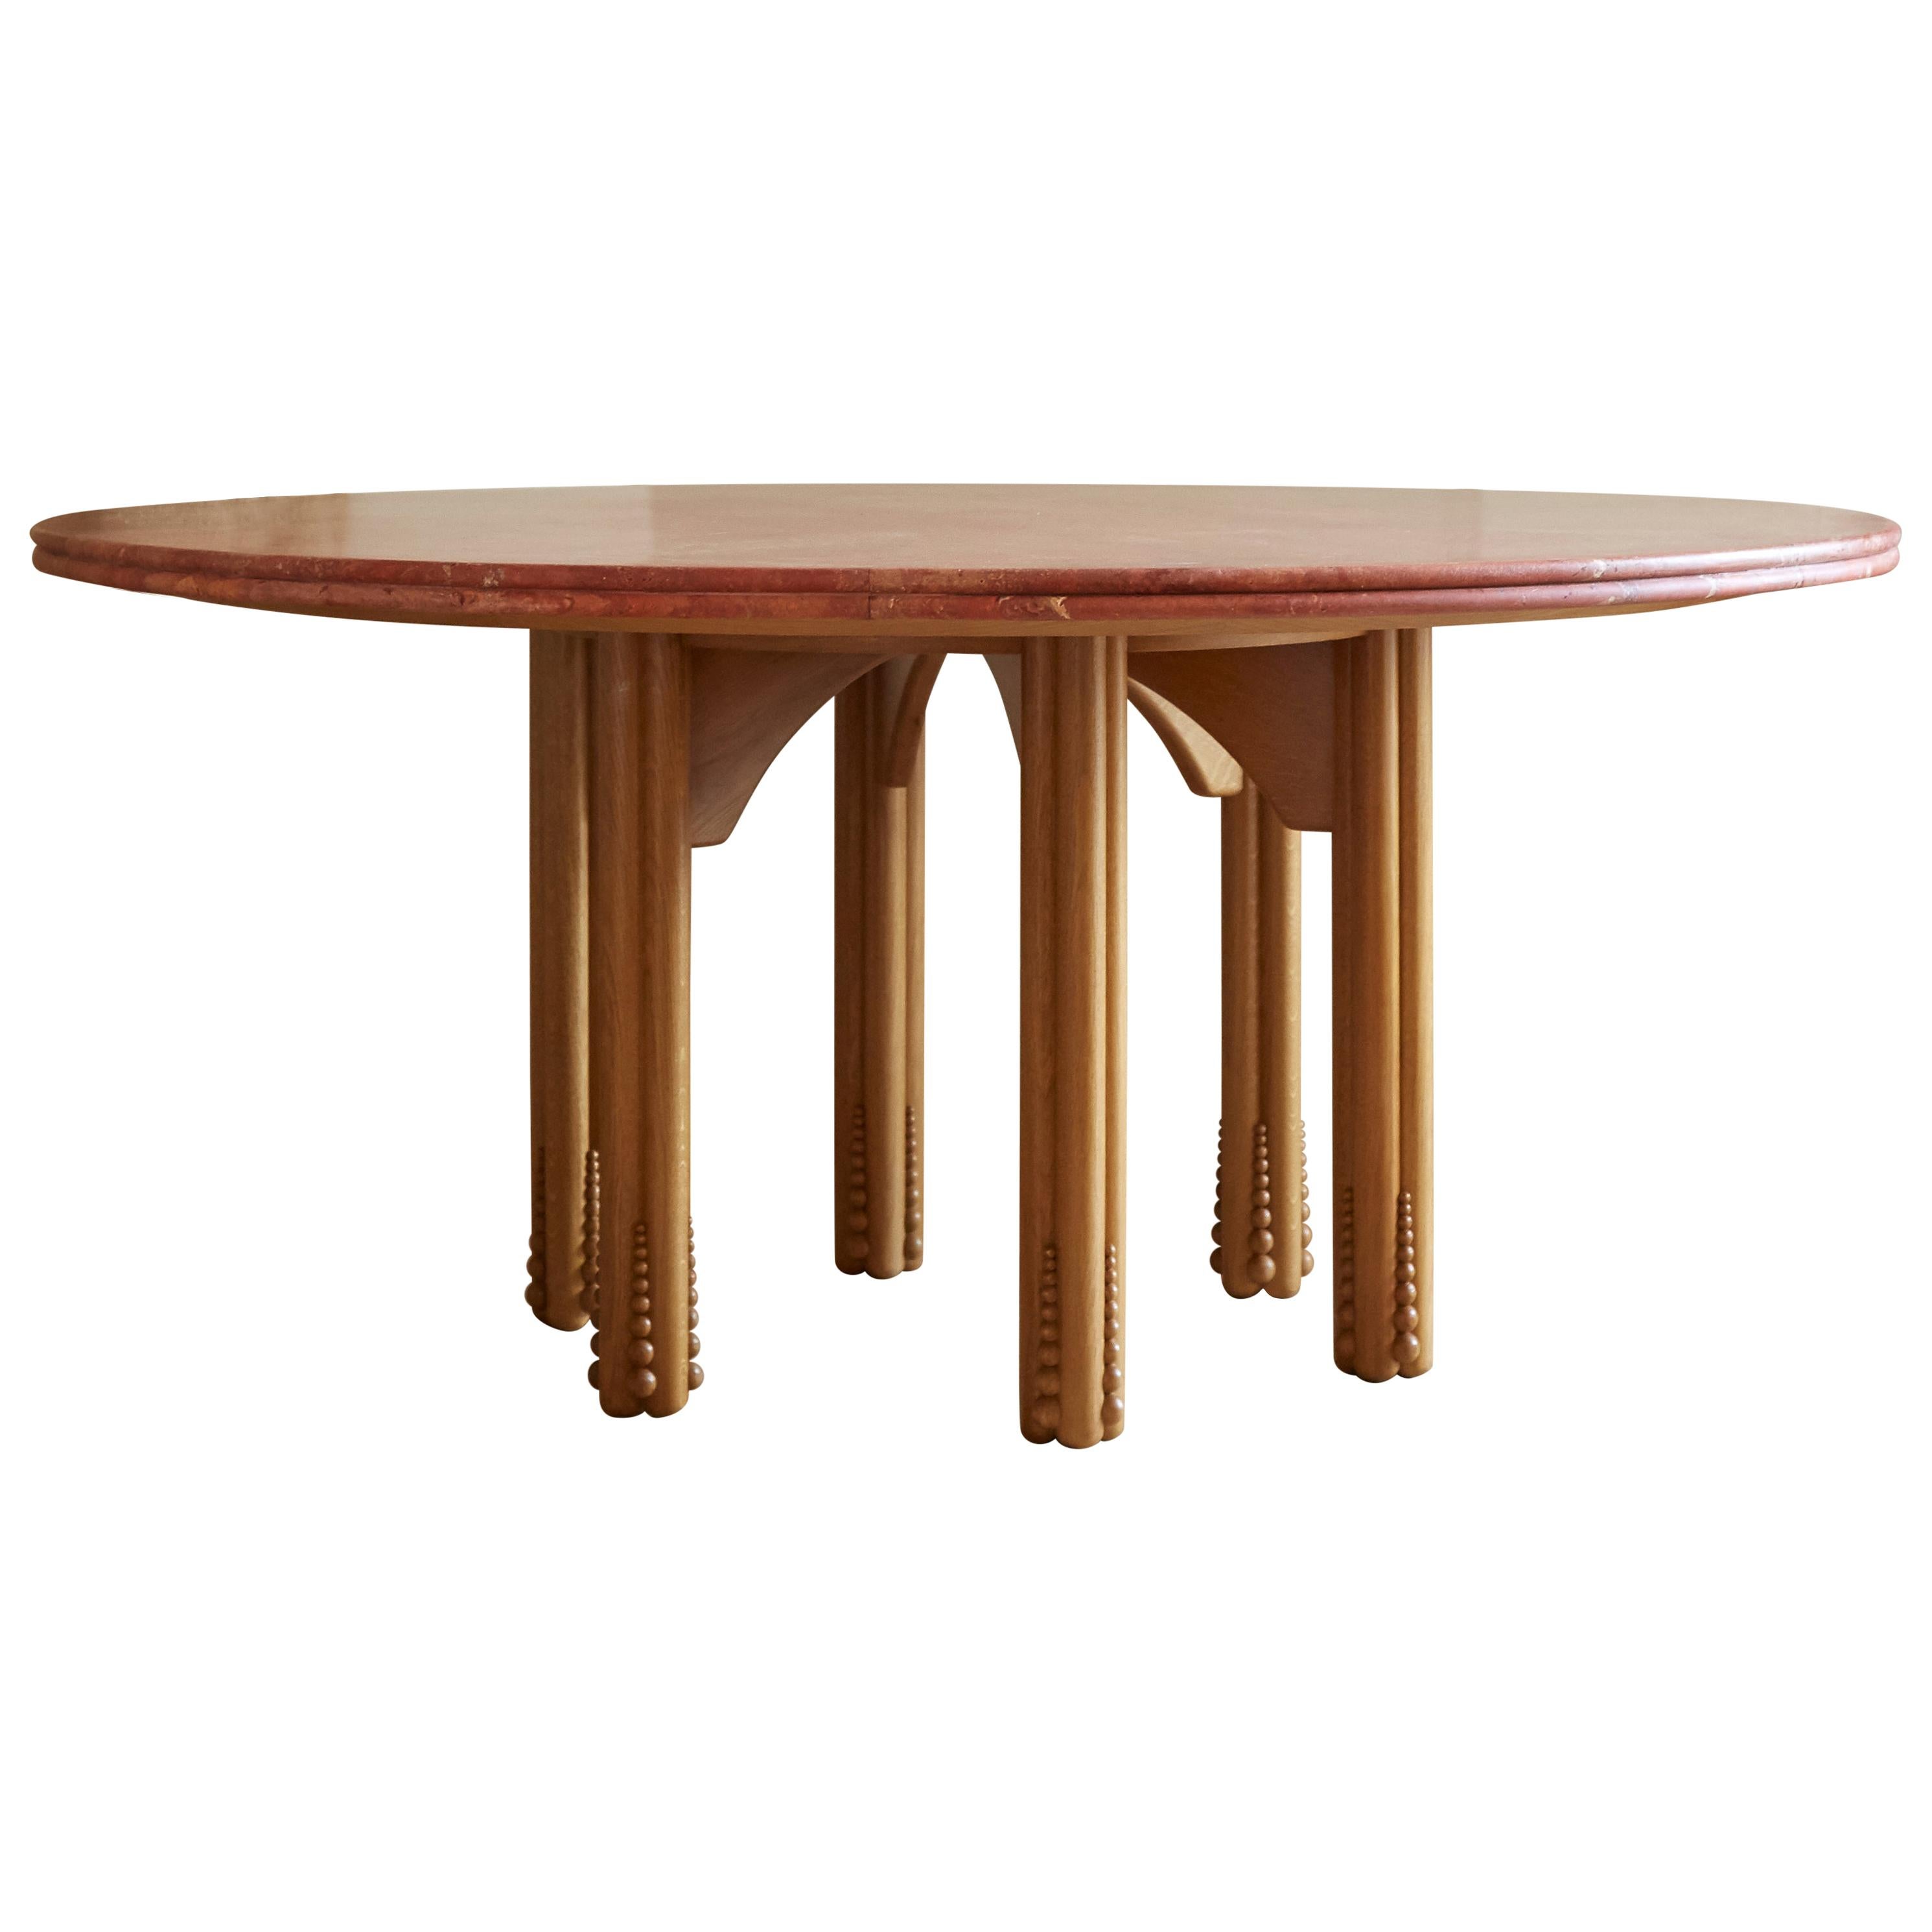 Octopus Round Dining Table with Travertine Top Designed by Laura Gonzalez